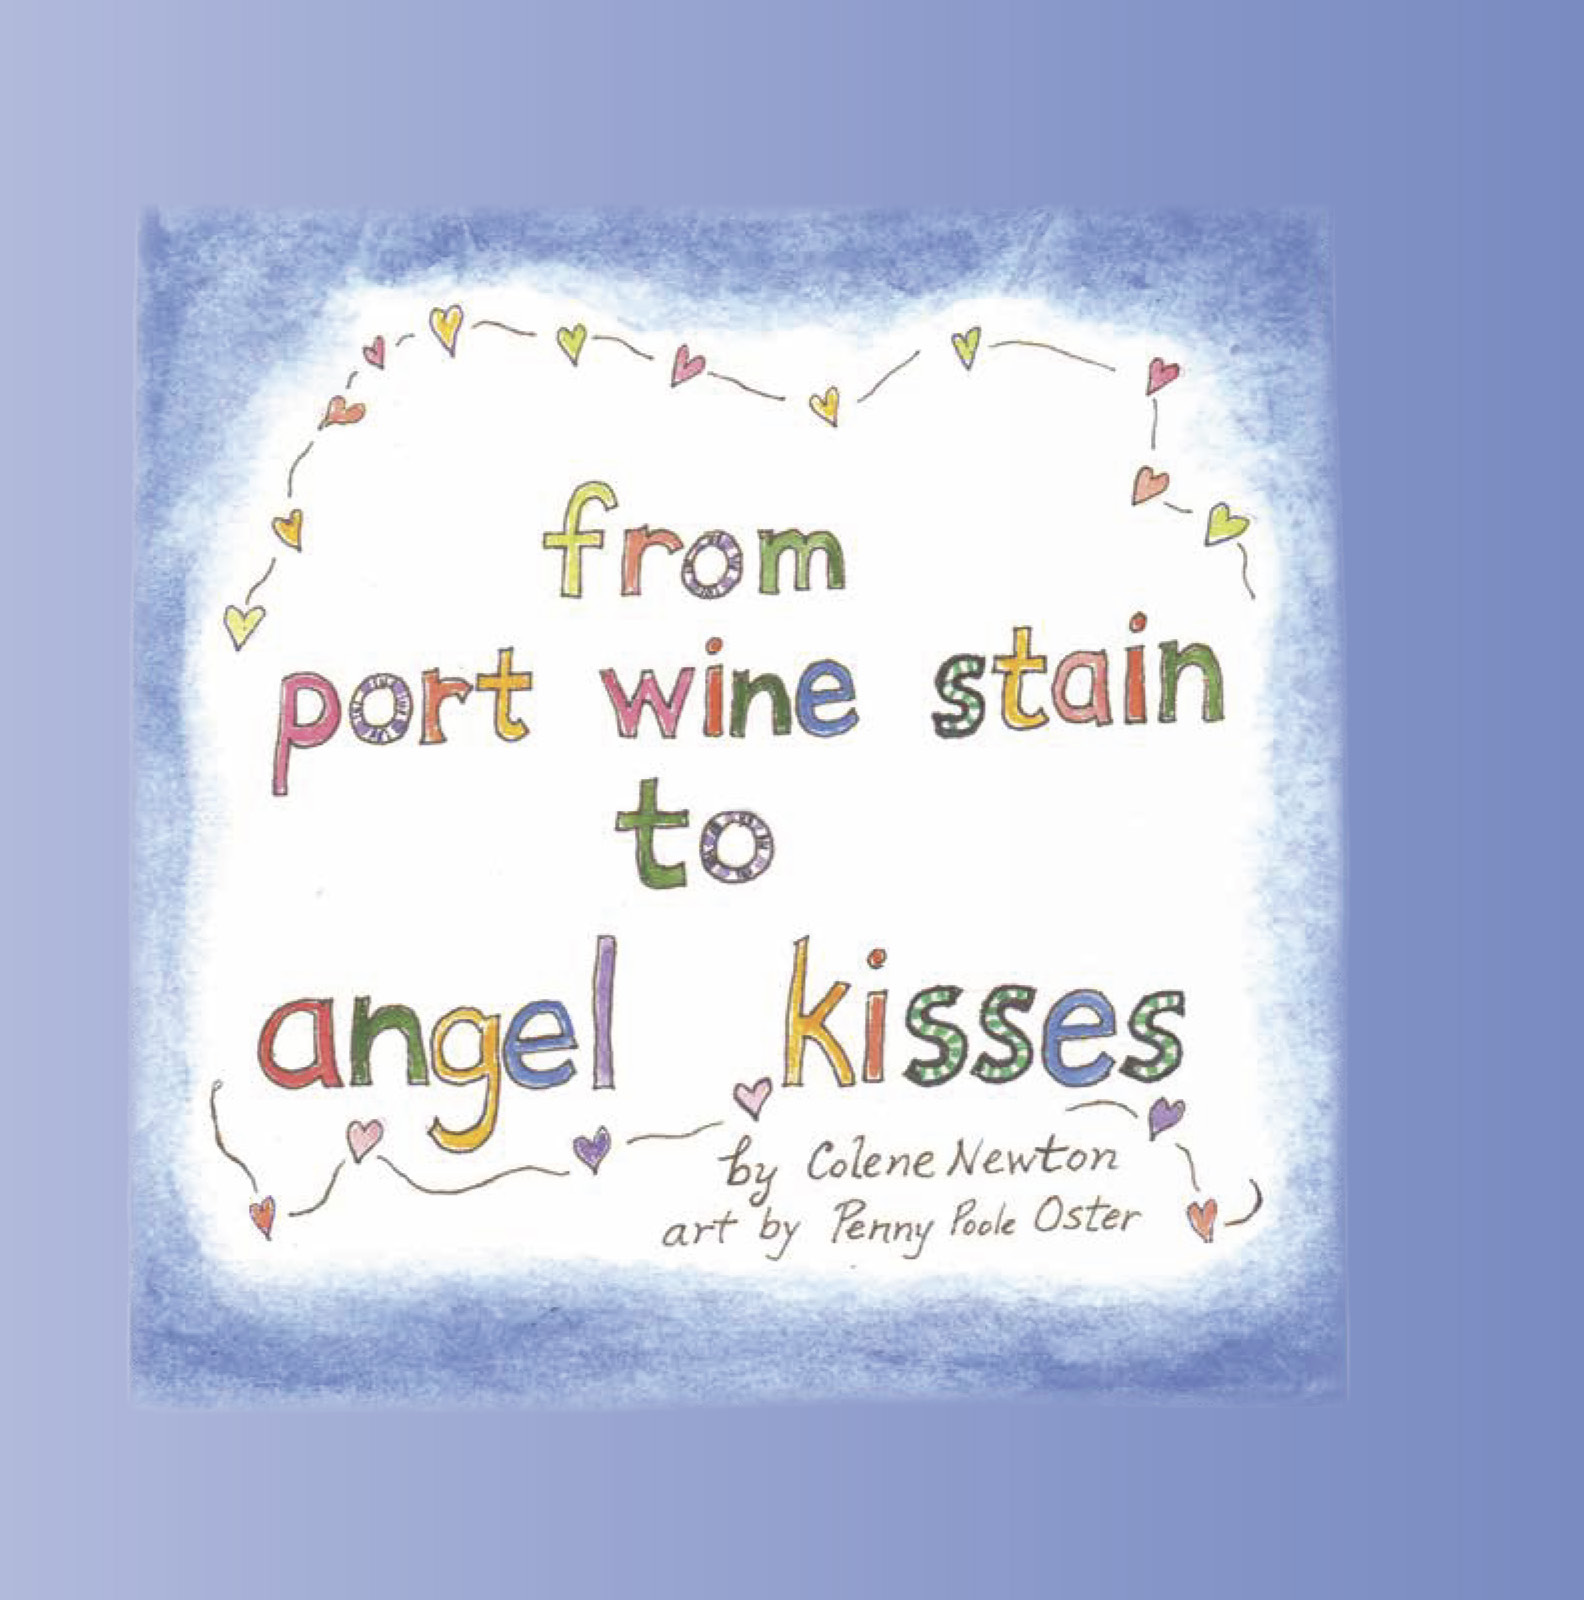 From Port Wine Stain to Angel Kisses by Colene Newton